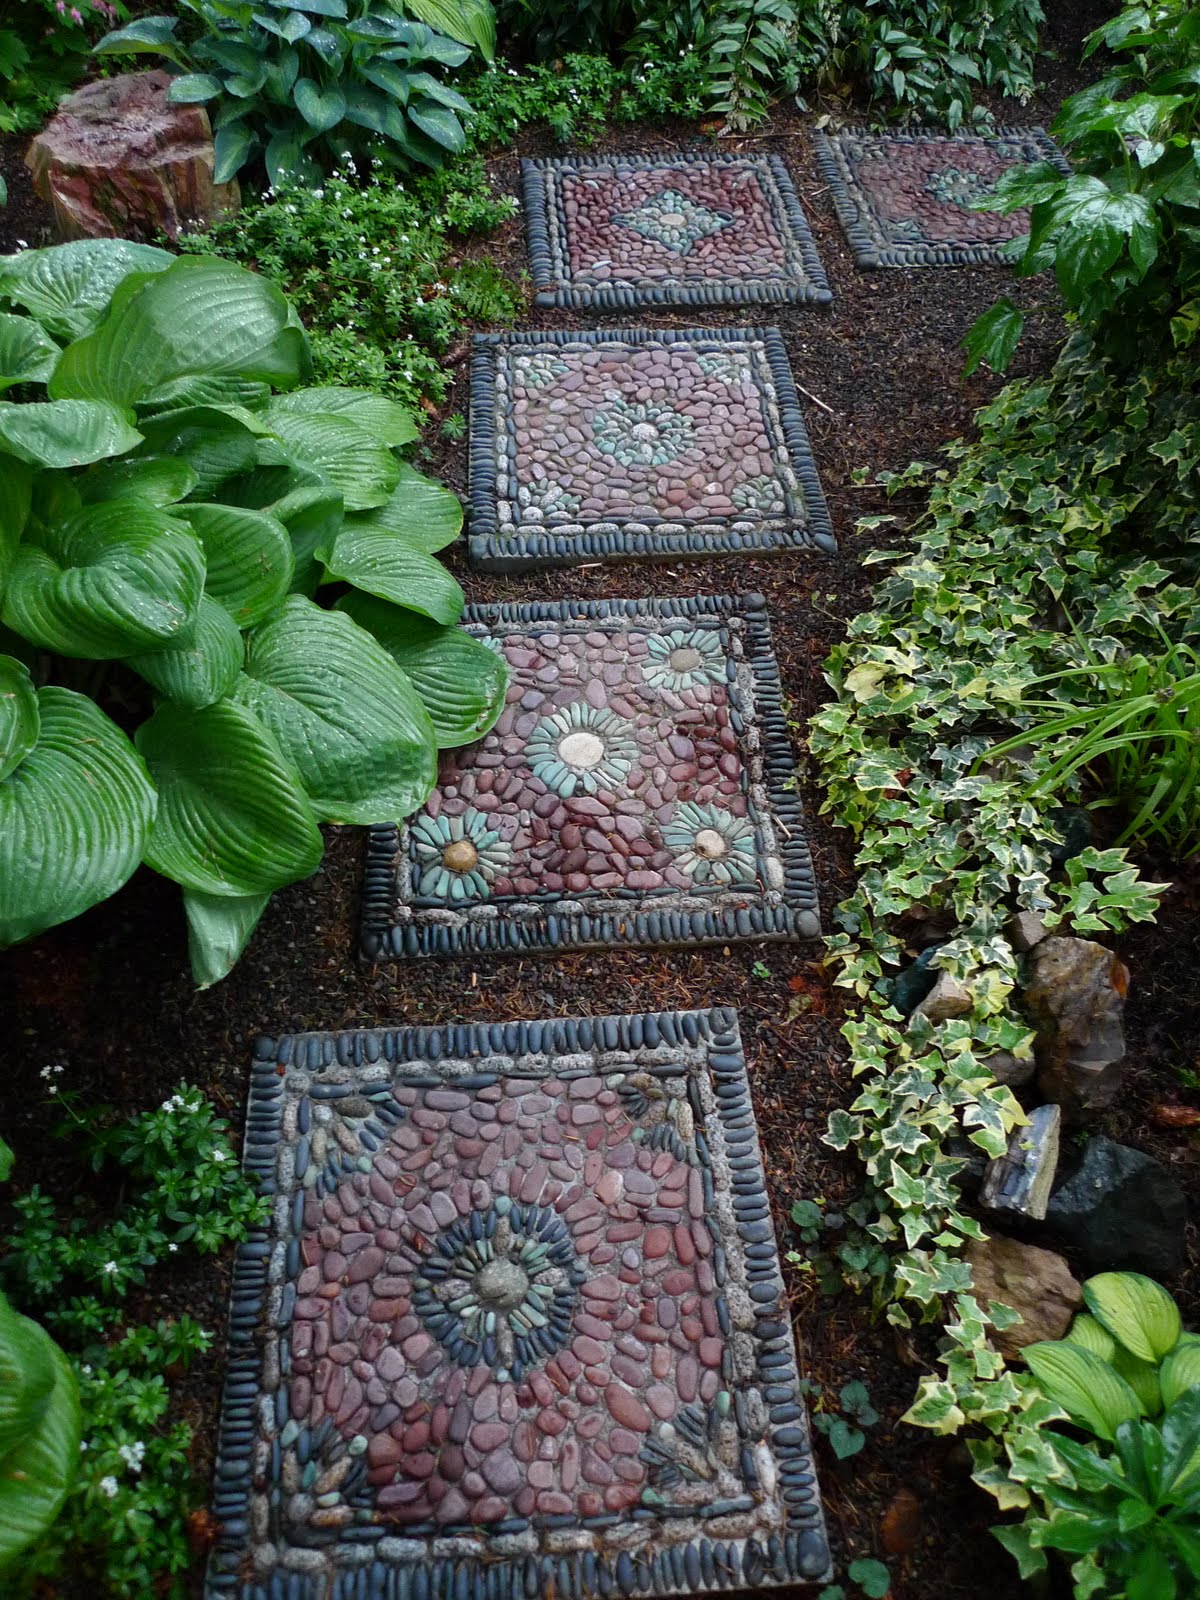 30 Beautiful DIY Stepping Stone Ideas to Decorate Your Garden --> How to Make Pebble Mosaic Stepping Stone